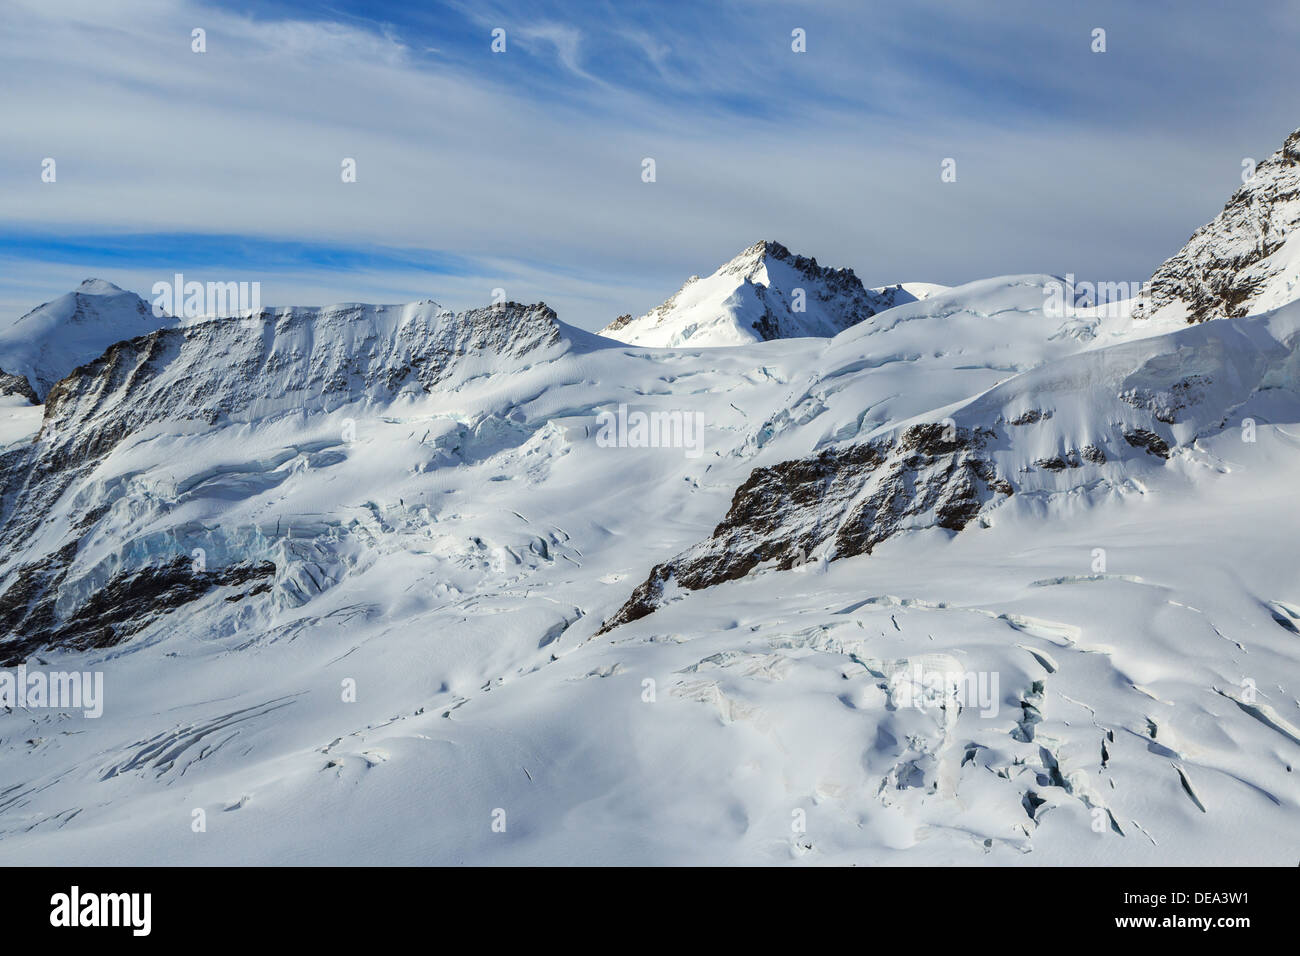 A photograph of some snow capped mountain peaks in the Jungfrau region of Switzerland. It was taken from Junfraujoch at 3500 m Stock Photo